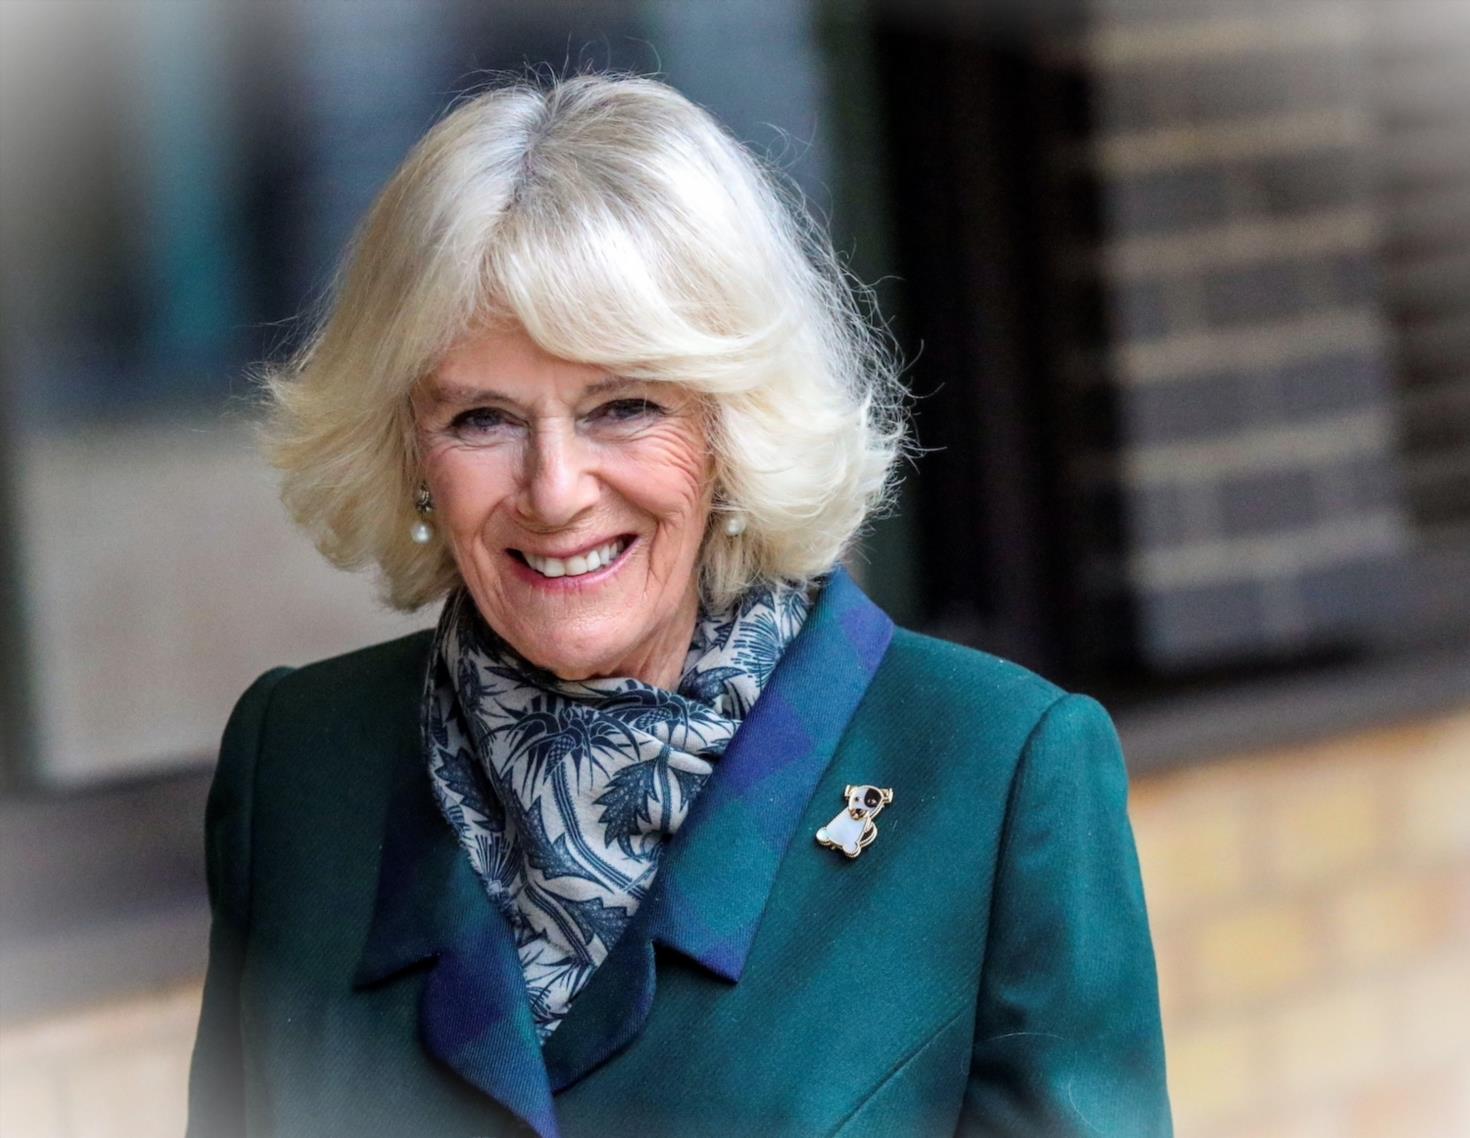 Camilla to be Officially Named Queen Camilla at King Charles IIIszfFqDt 5